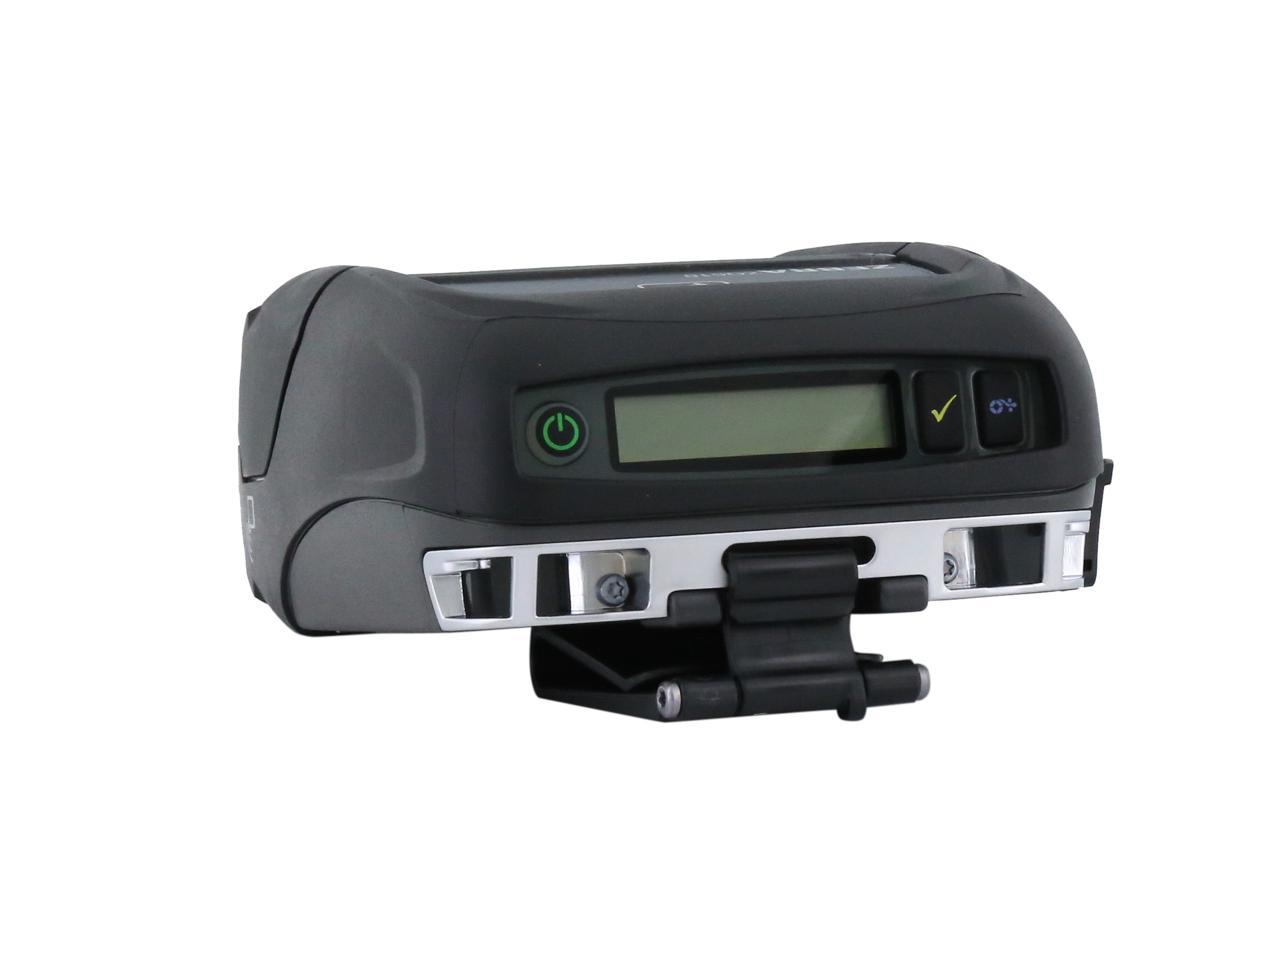 Zebra Zq510 3 Mobile Direct Thermal Receipt And Label Printer 203 Dpi Bluetooth 40 Linered 6289